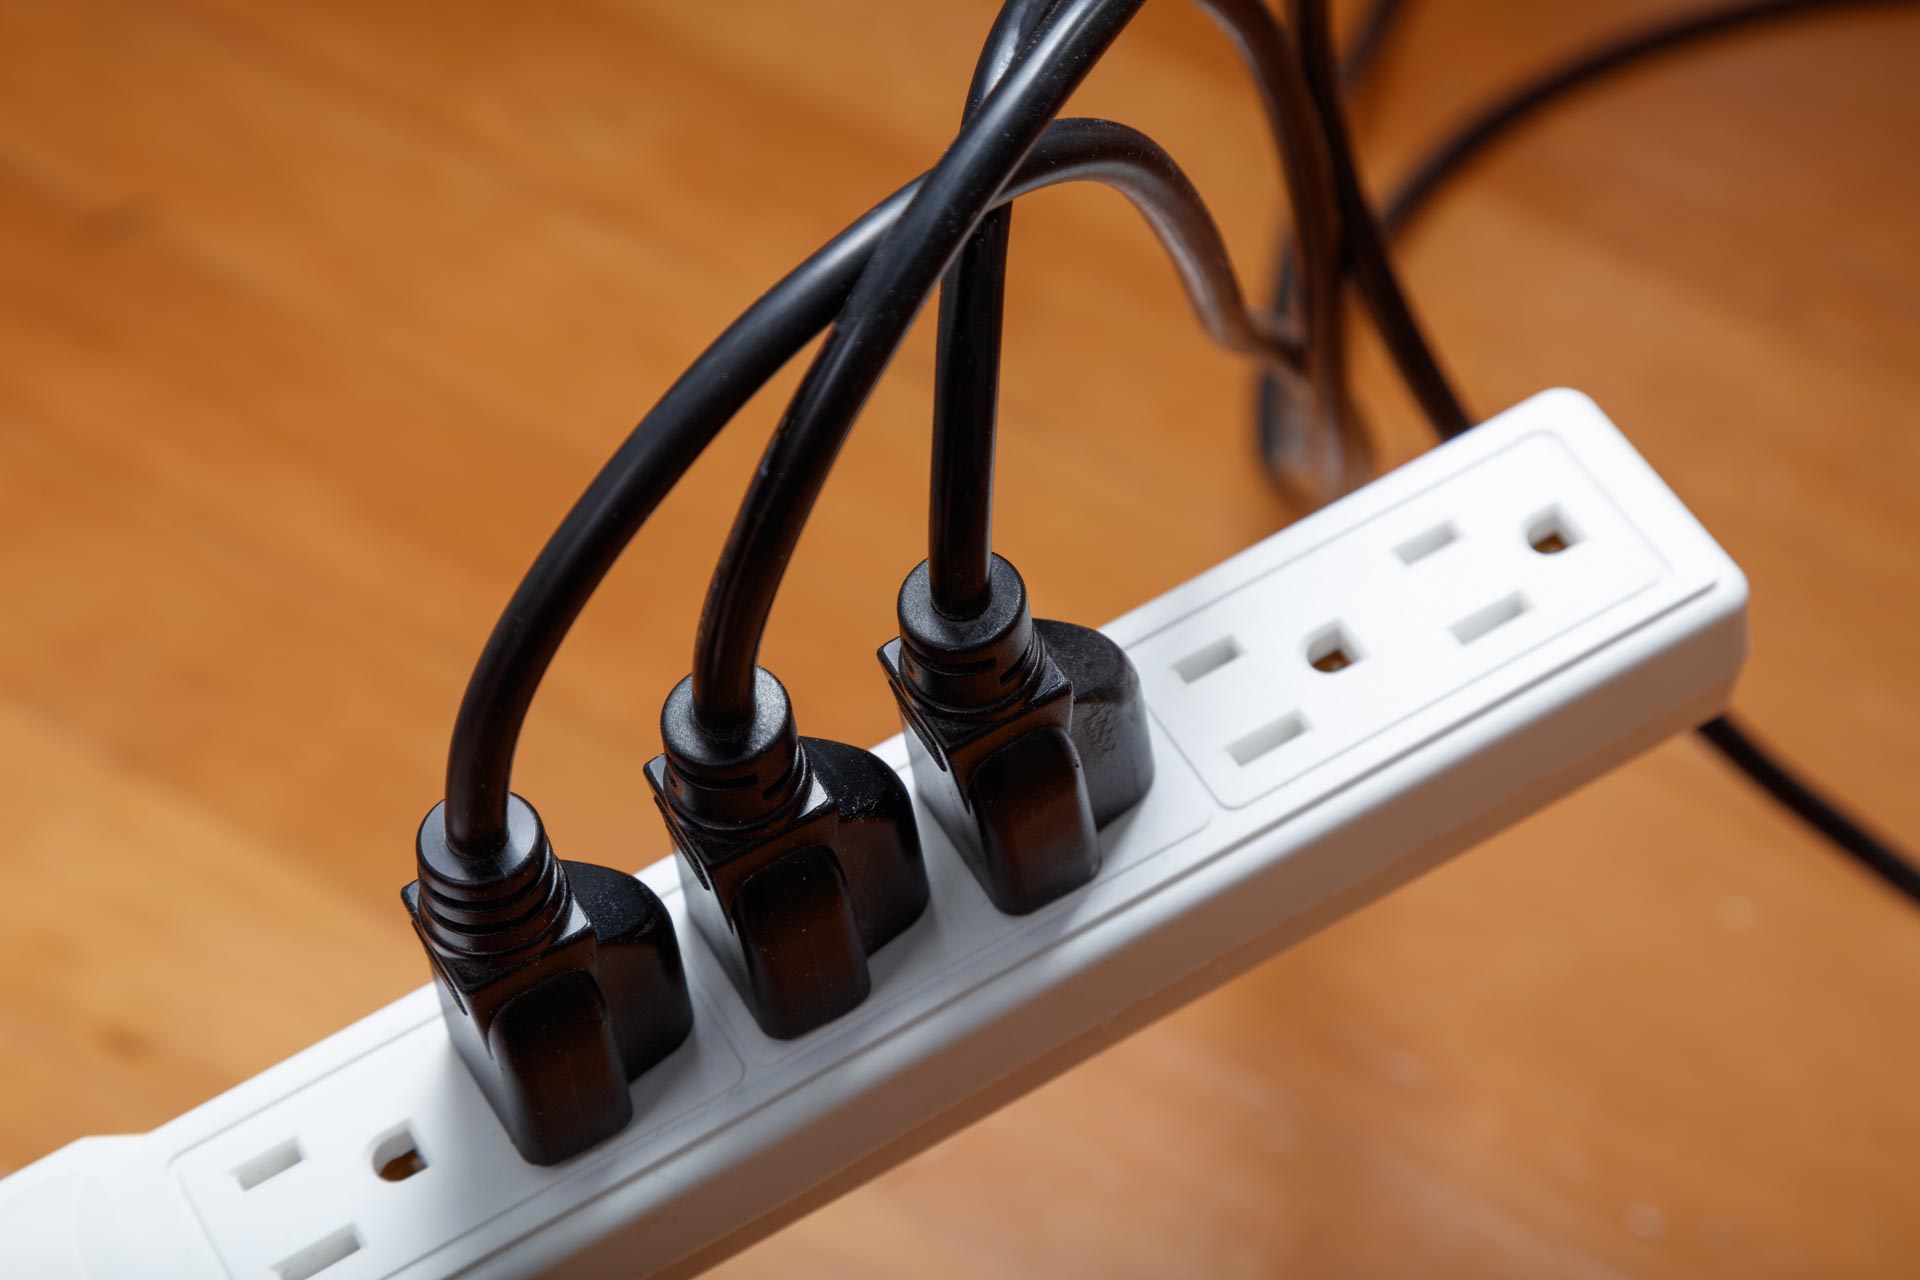 make the most of your power outlet and save money on your electric bill